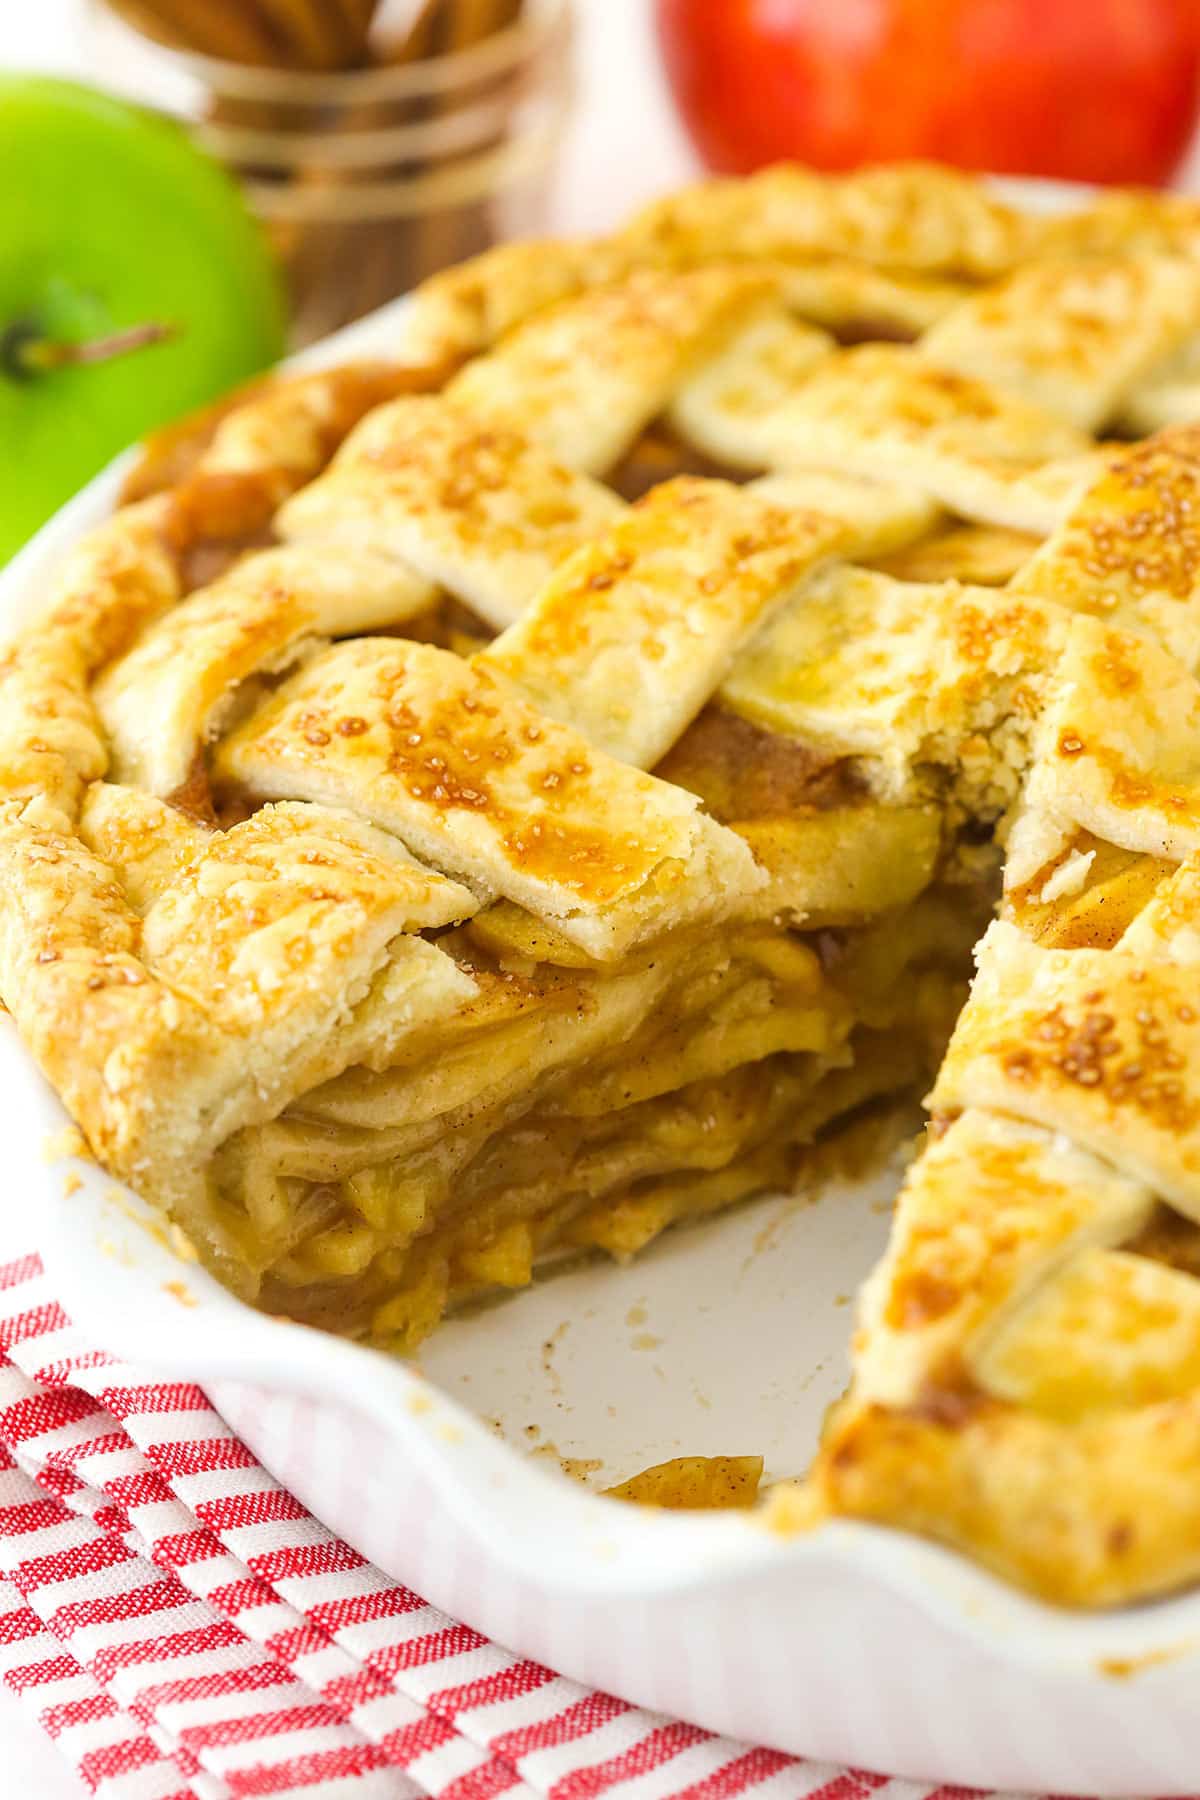 Apple pie with a slice missing